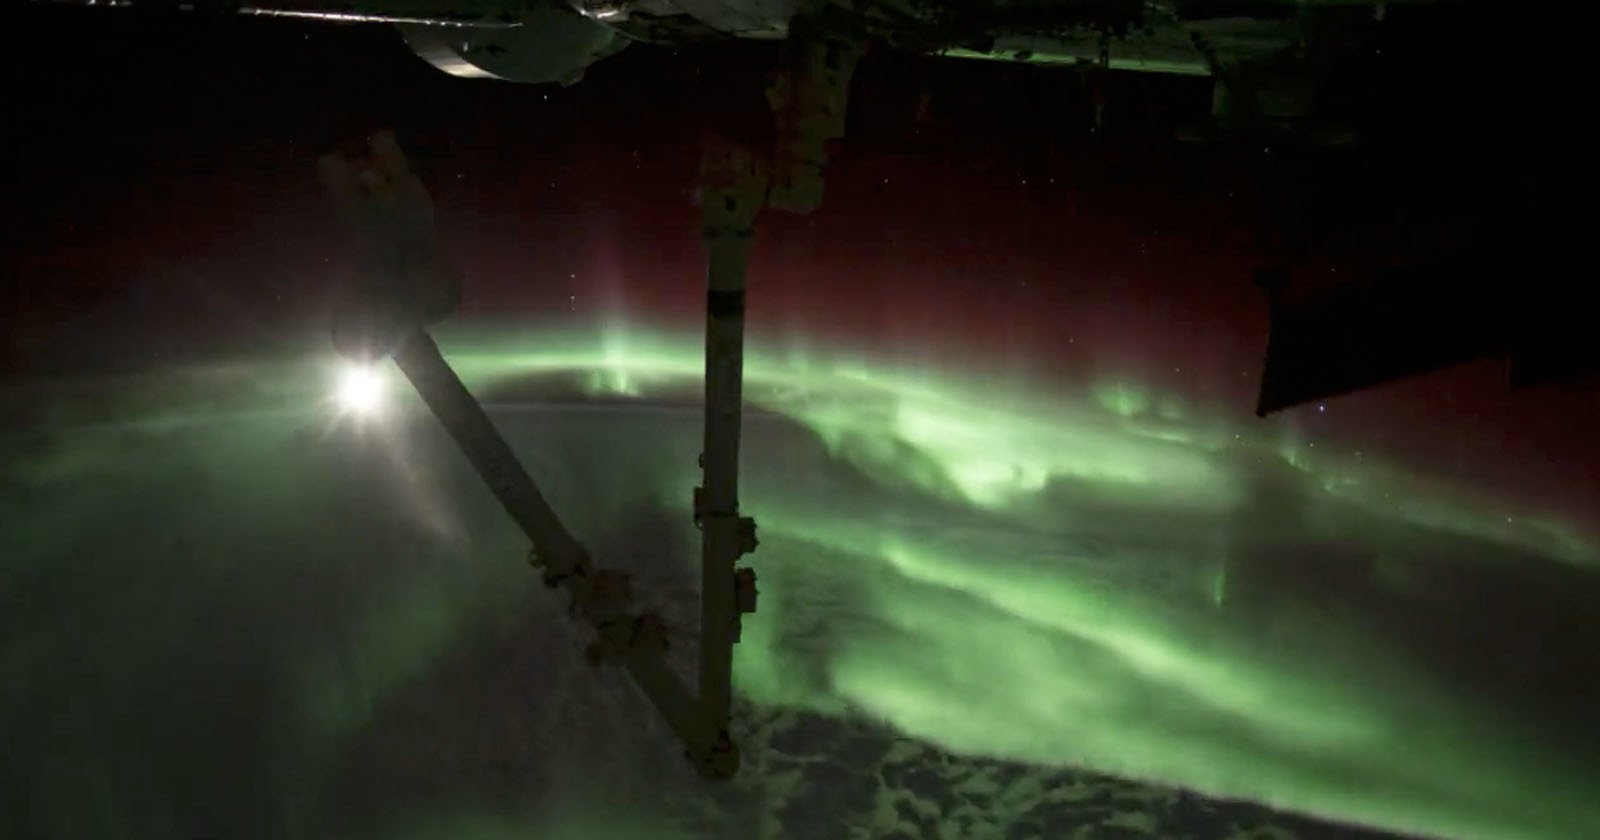 Orbital Pass Video From ISS Shows Aurora, Moonrise, and Lightning